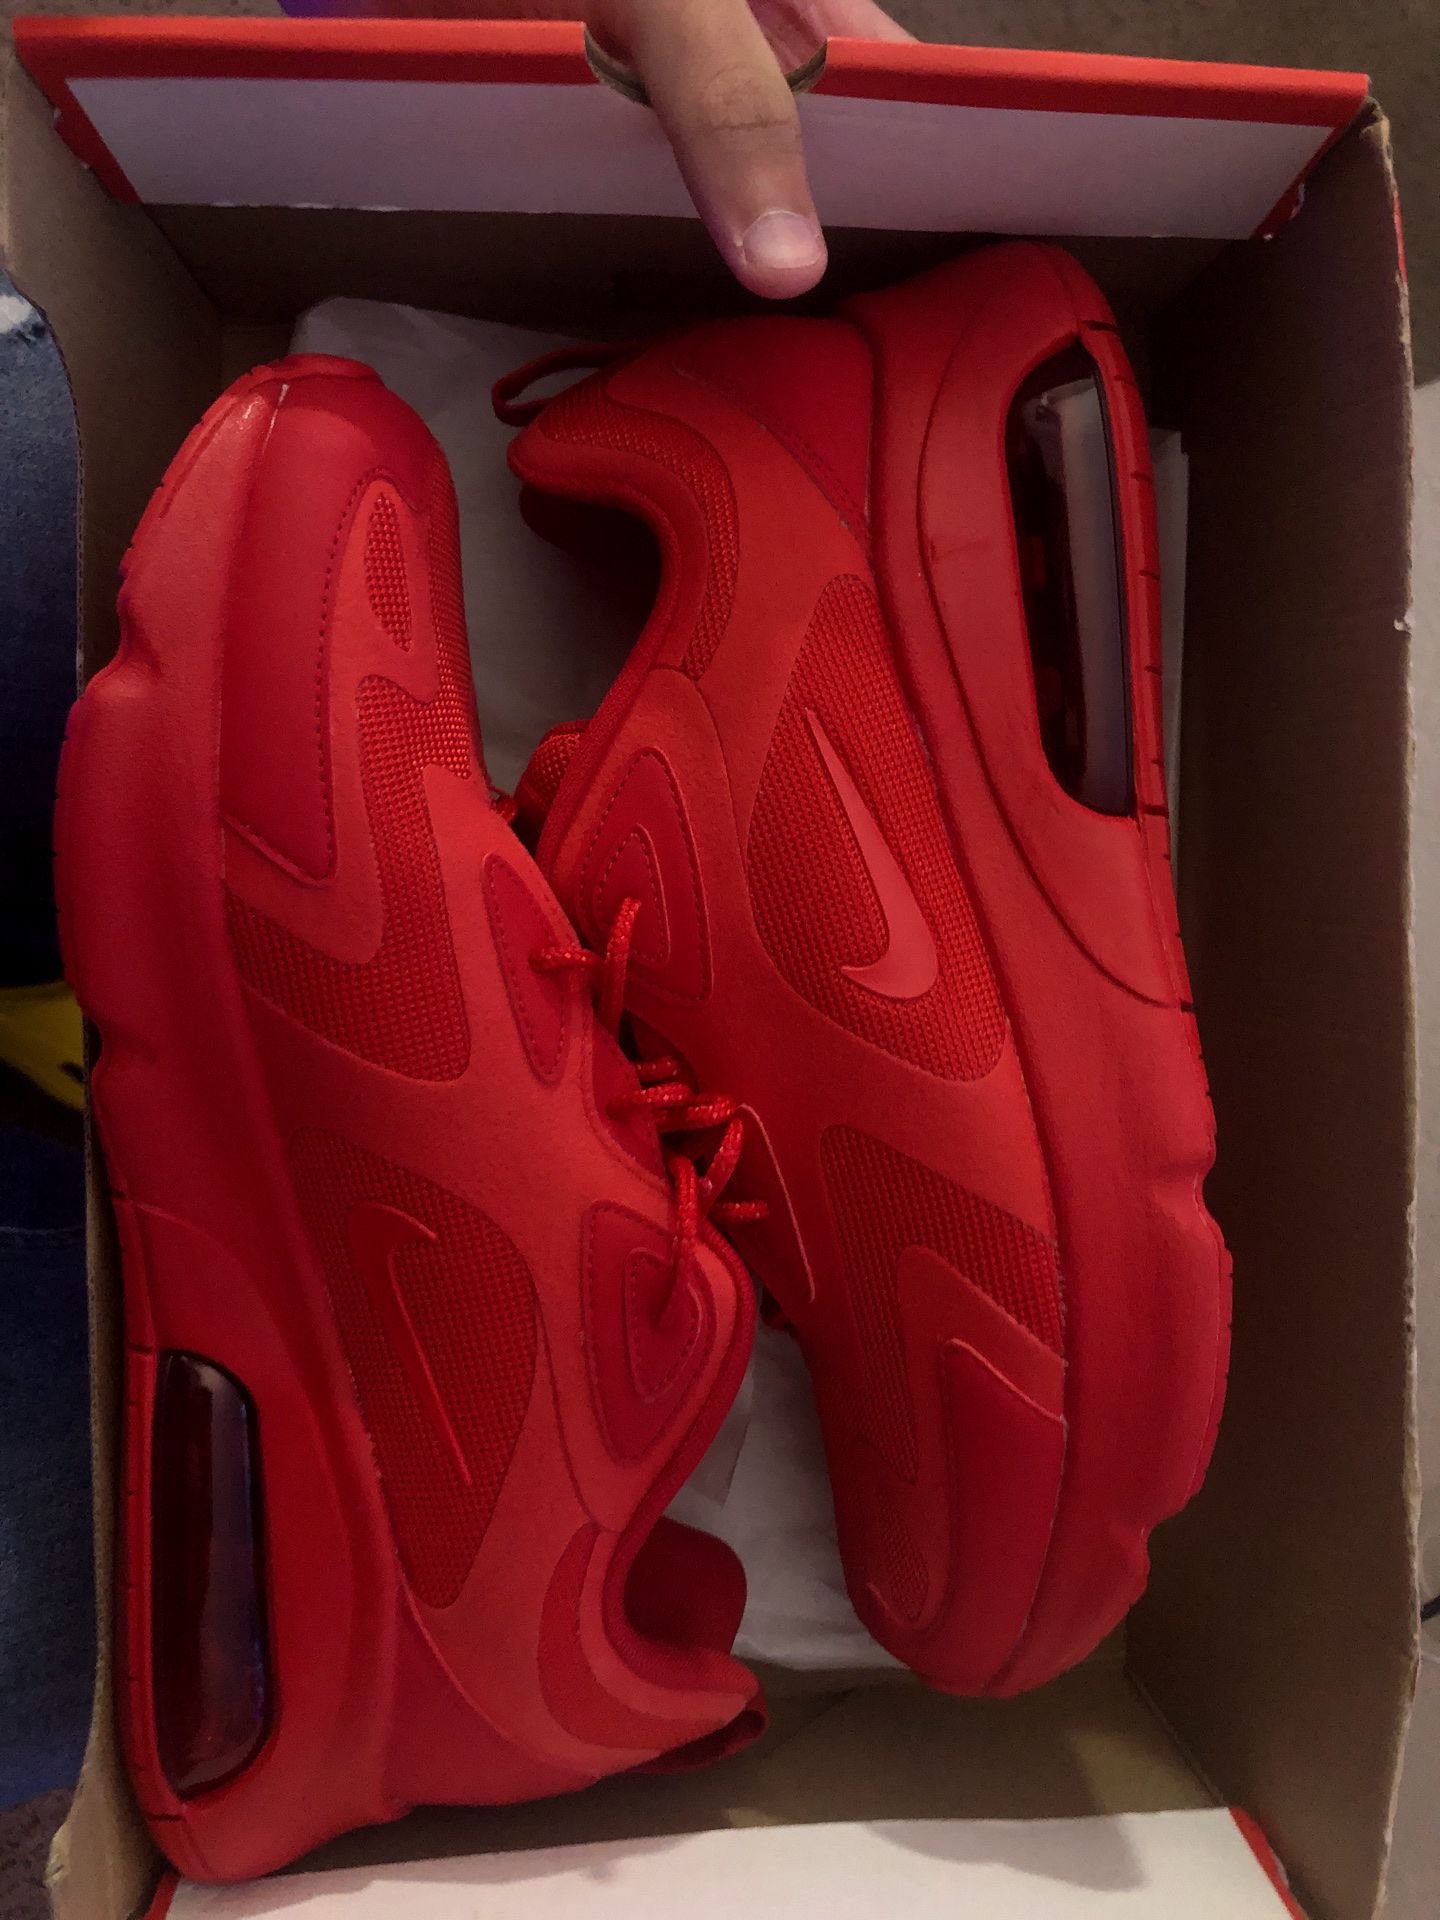 Air max 200 gym red (Jordan,Nike,adidas and more check my page out)